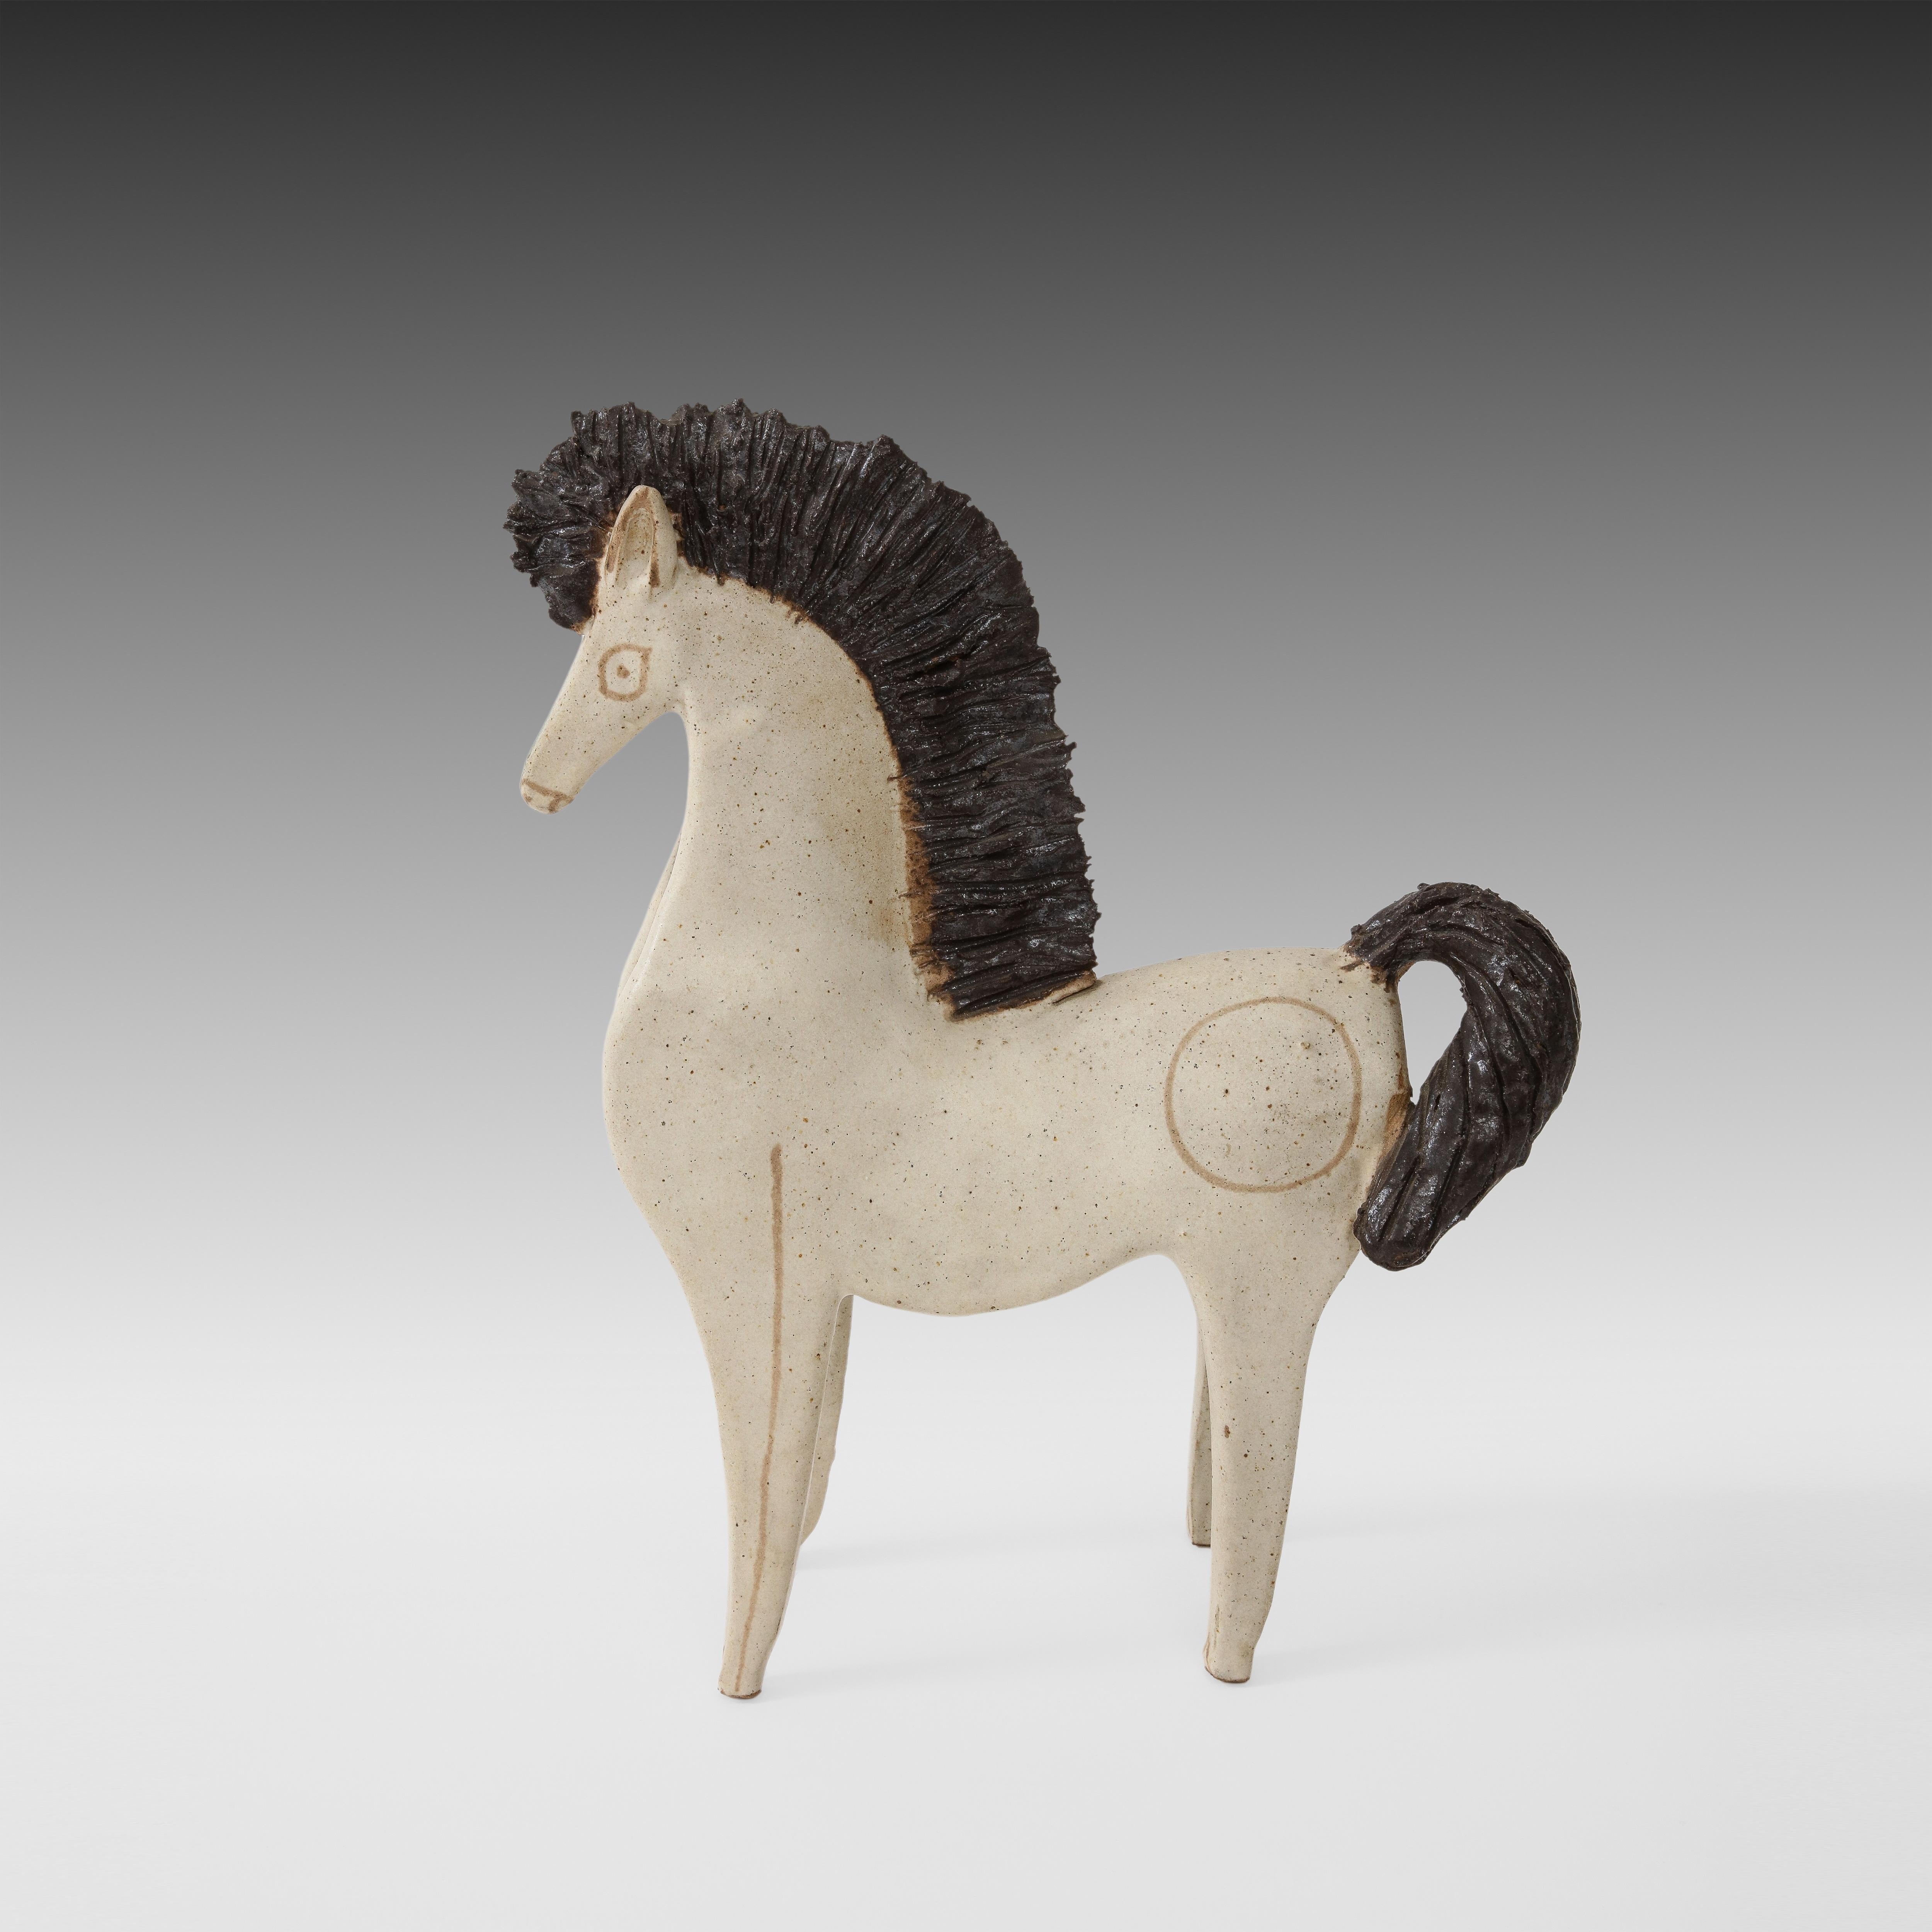 Bruno Gambone large glazed ceramic horse sculpture with flattened hollow body, Italy, 1970s. This regal stoneware horse has an off-white matte glazed body with tan decorations and dark brown mane and tail. 
Signed on underside “GAMBONE ITALY.”